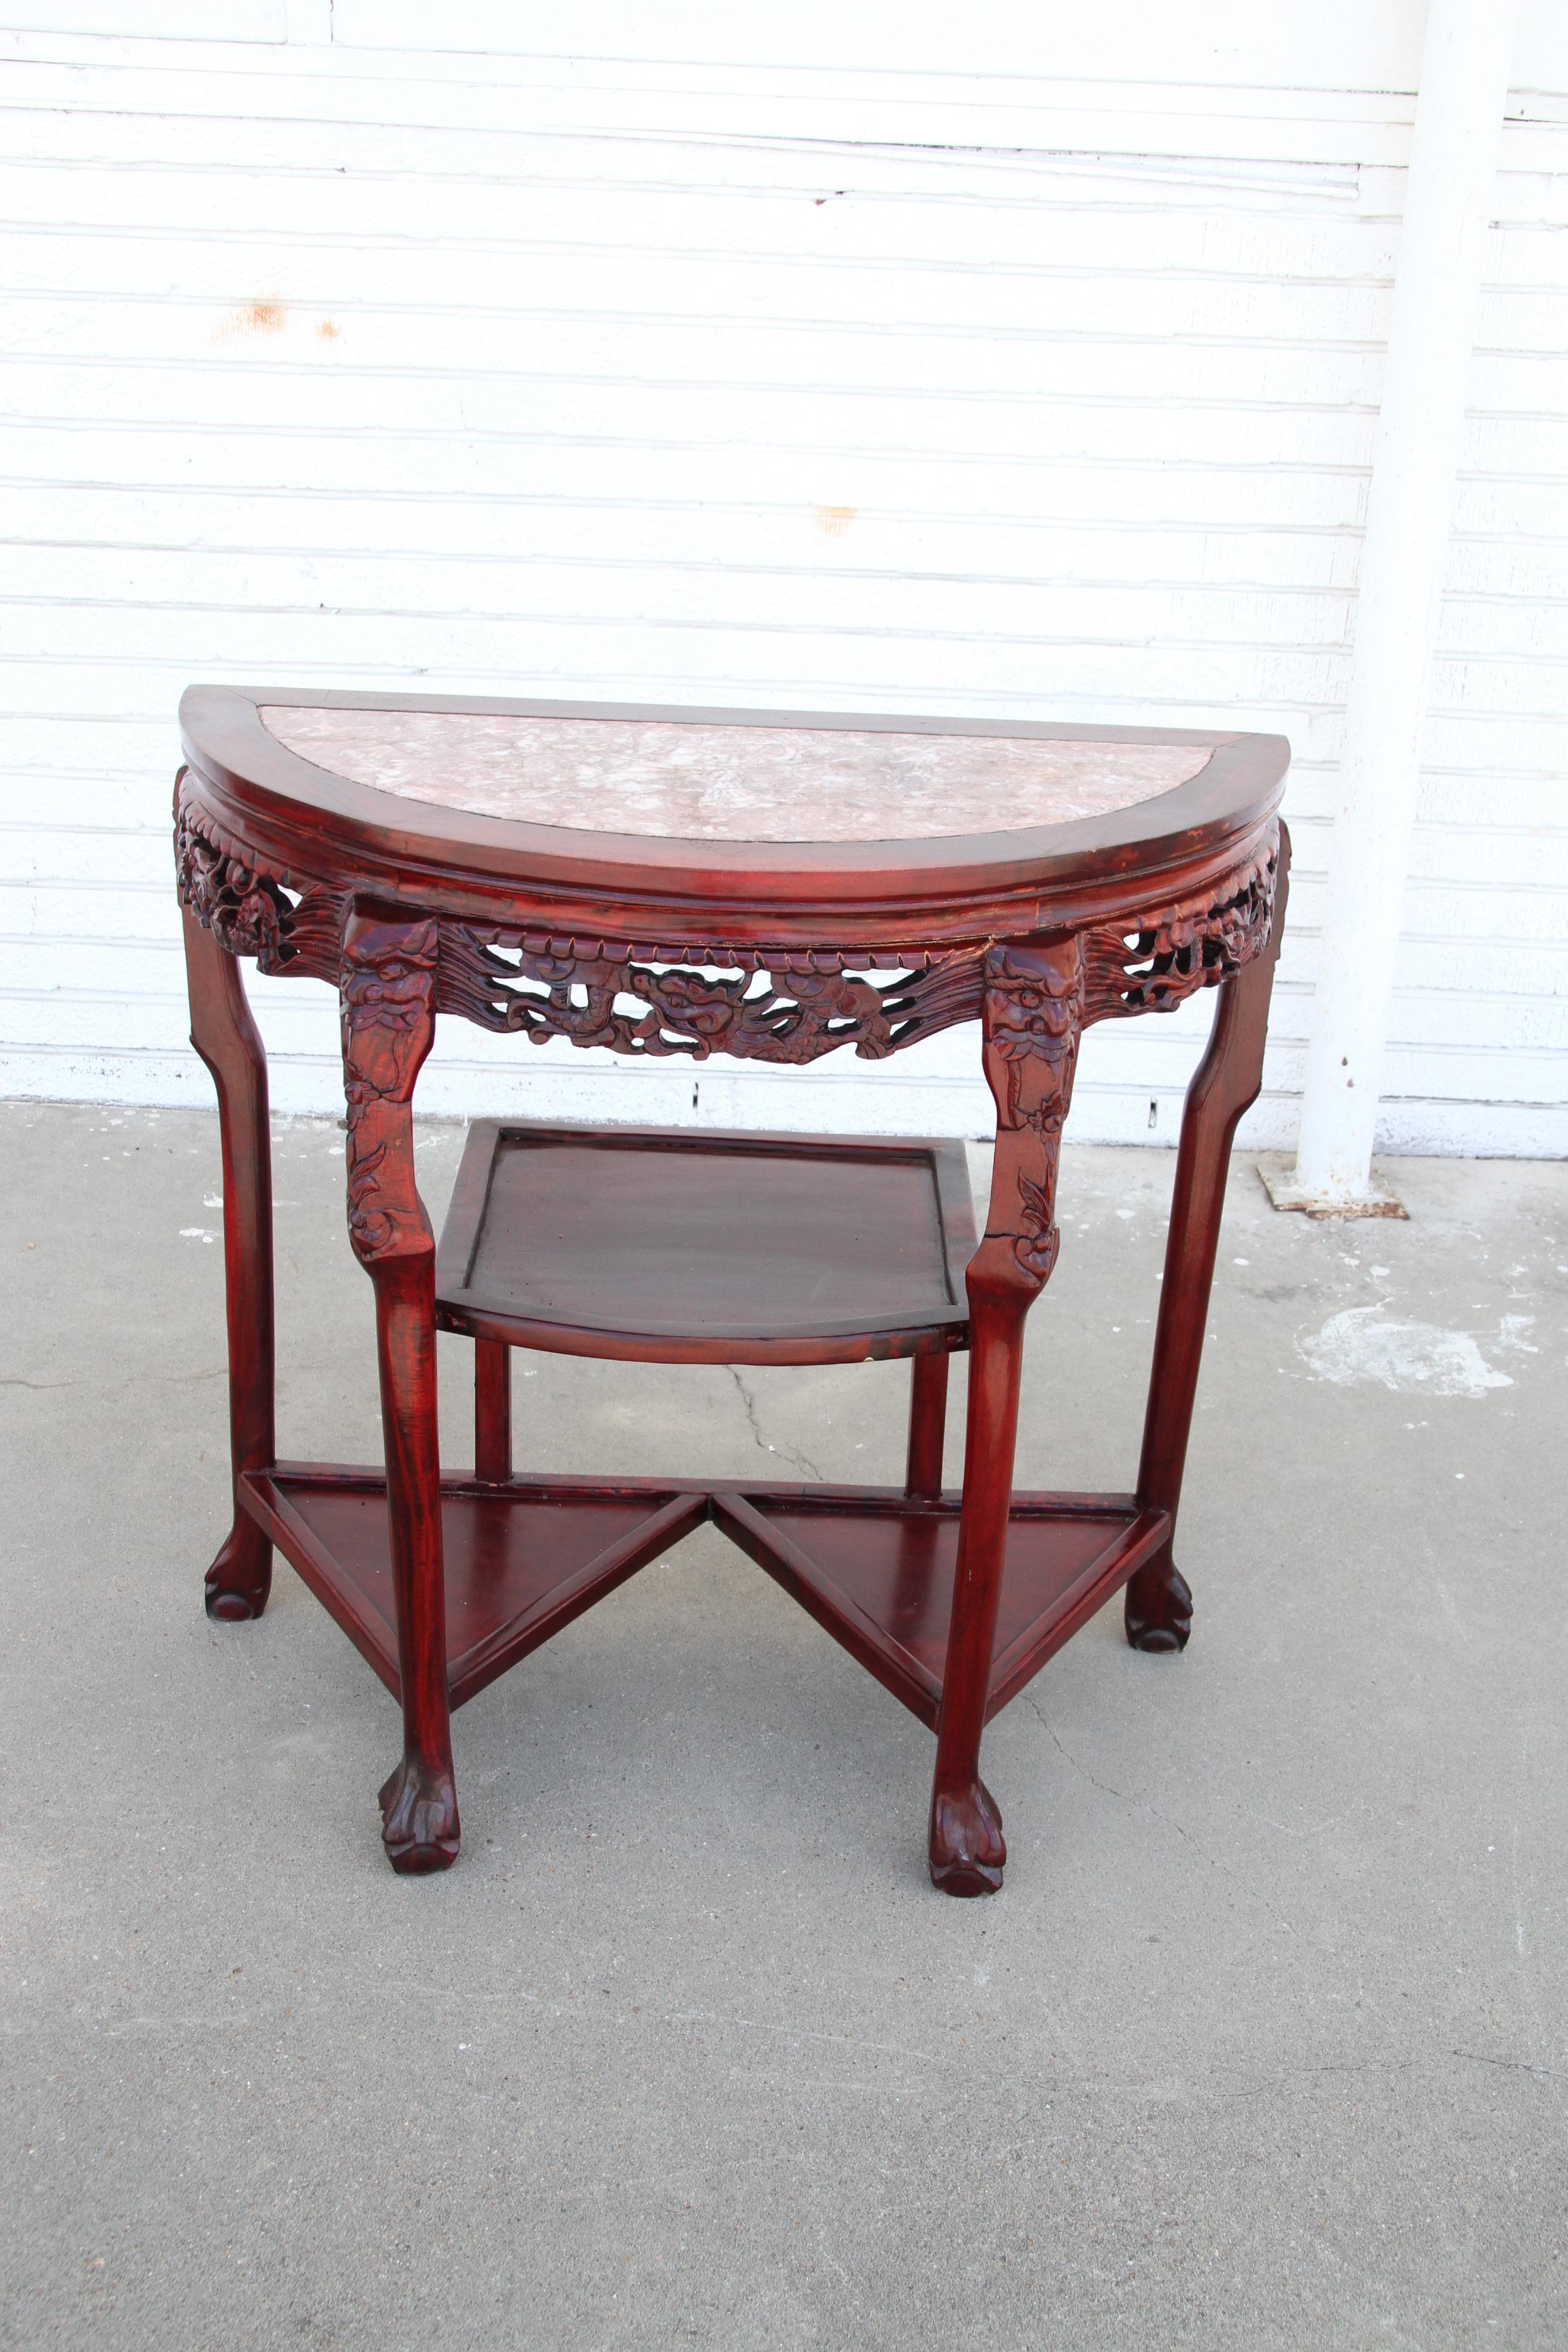 Chin Hua Marble Console 

Vintage Oriental Chinese carved hardwood demilune marble top console table. Item features a half round demilune top with inset pink marble, carved ball and feet and multiple tiers.

Measurements: 32